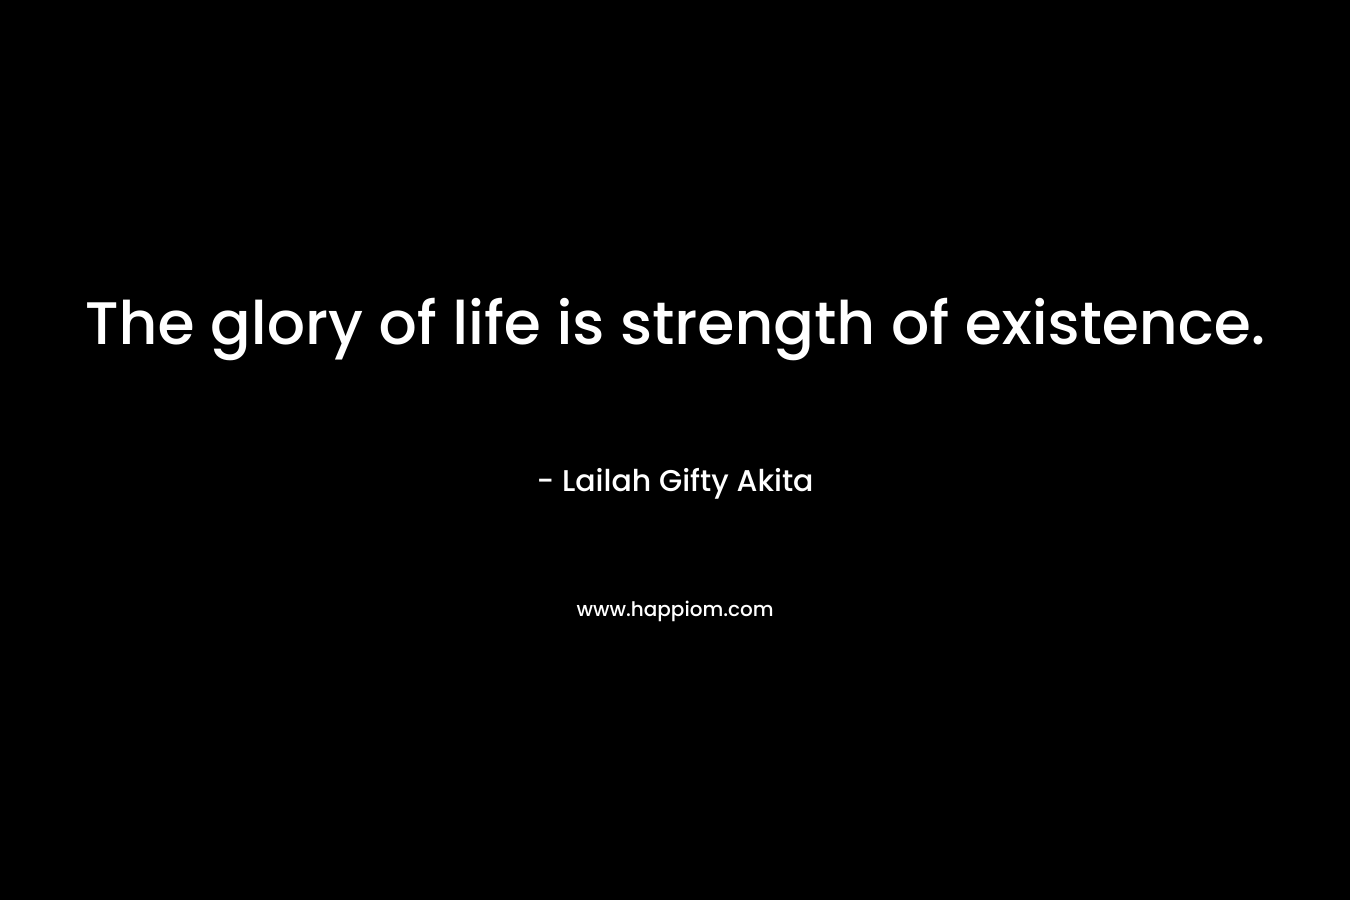 The glory of life is strength of existence.